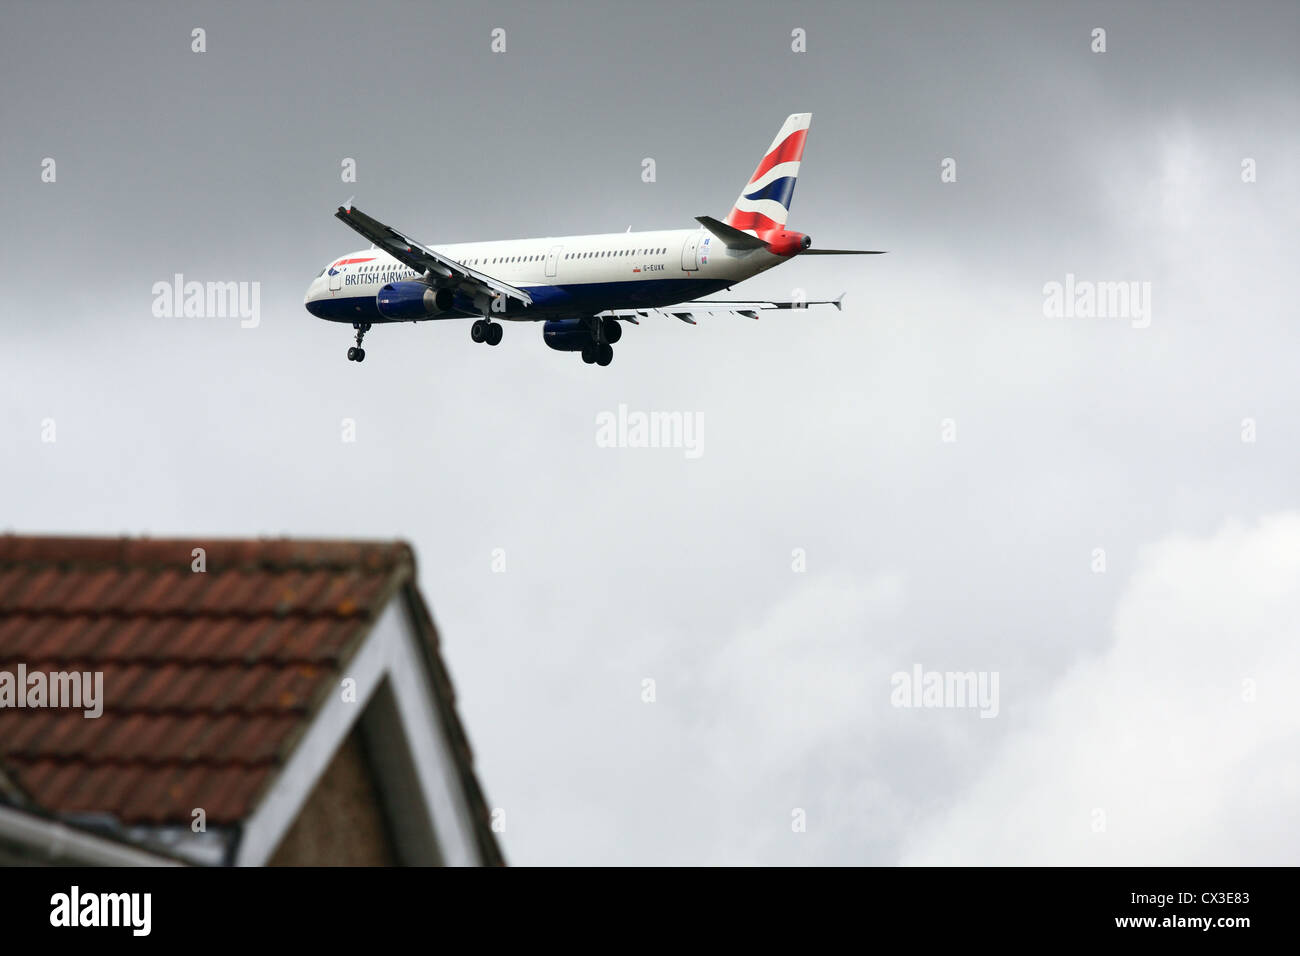 An aircraft flying over houses as it comes in to land at Heathrow airport Stock Photo